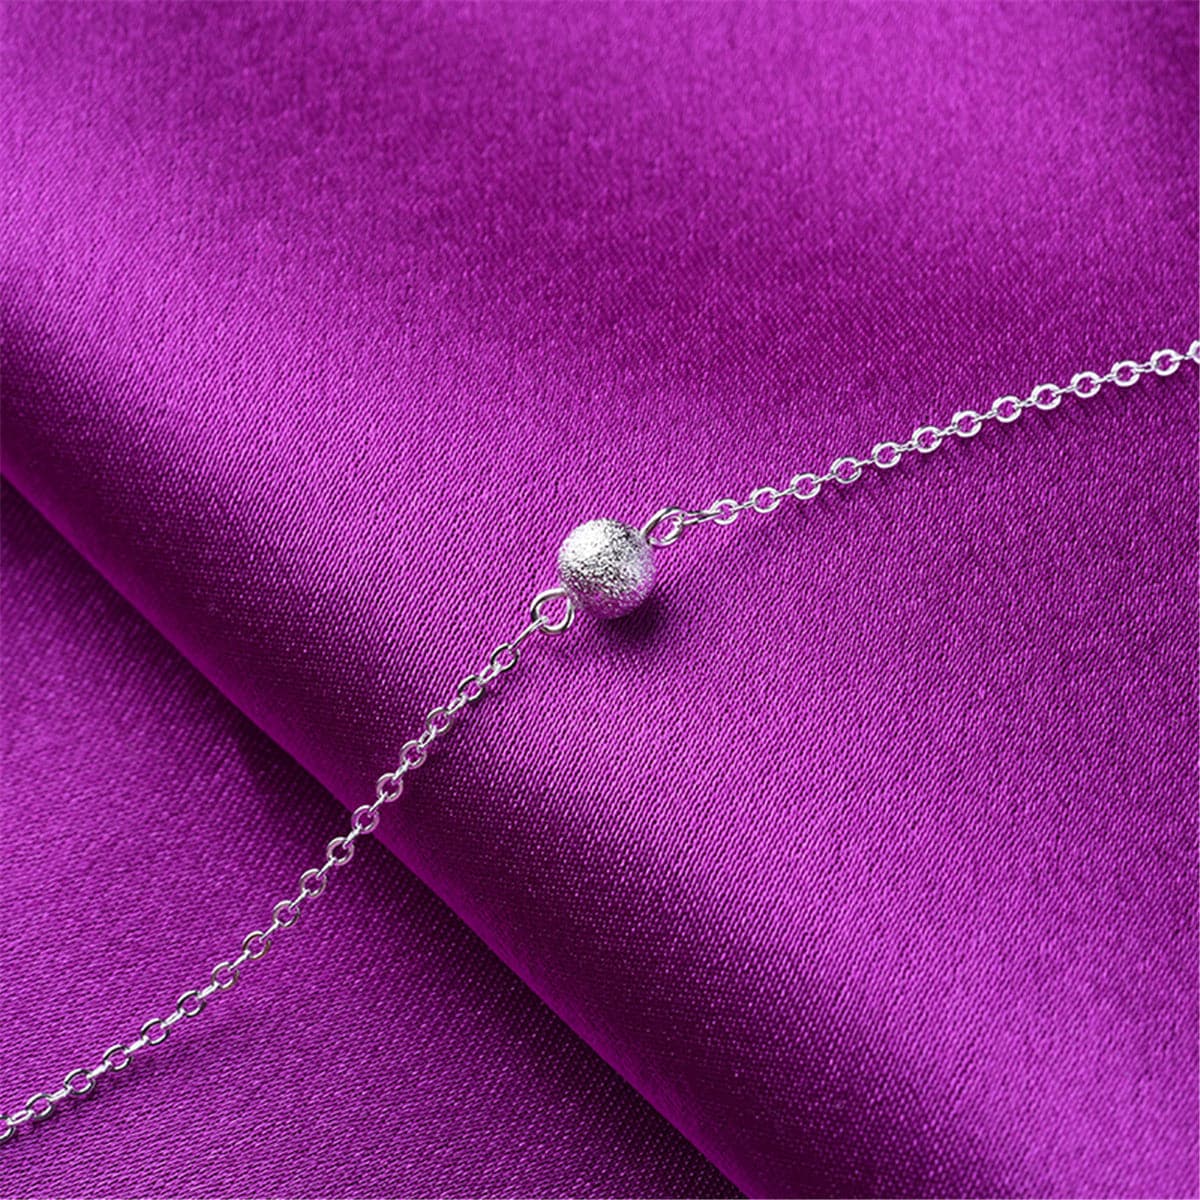 Silver-Plated Frosted Bead Charm Anklet